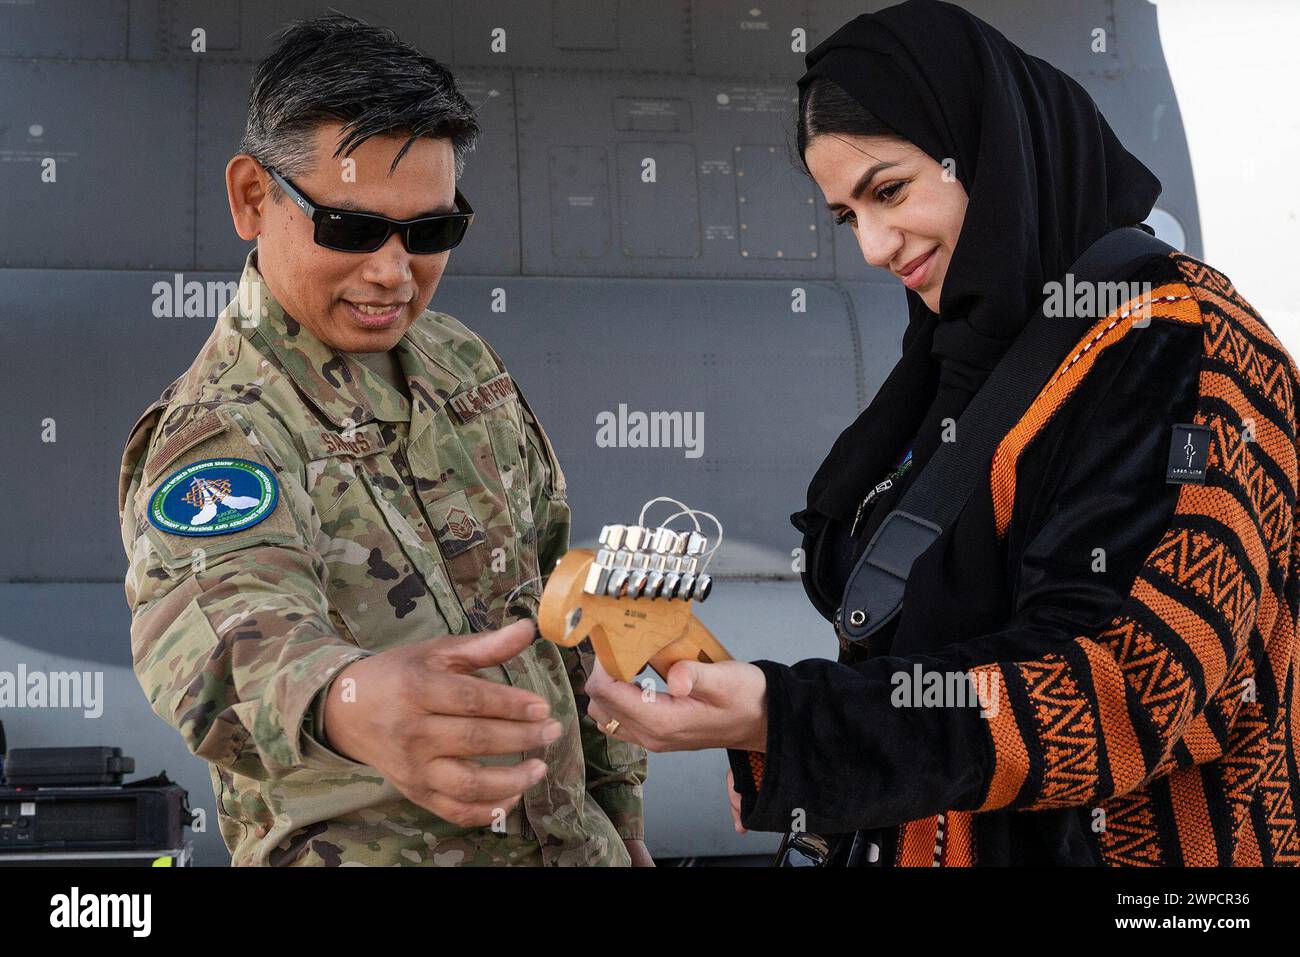 Saudi Arabia. 7th Feb, 2024. An Airman assigned to the U.S. Air Forces Central Band instructs a show attendee how to play a guitar during the Saudi World Defense Show near Riyadh. The AFCENT Band travels throughout Central and Southwest Asia performing community outreach concerts, school assemblies, military functions, troop morale concerts, and diplomatic events hosted by the USA Embassies and their ambassadors. Saudi Arabias WDS 2024, one of the regions largest defense expositions, includes a wide array of aircraft and assets from across the U.S. Department of Defense. (Credit Image: © Stock Photo